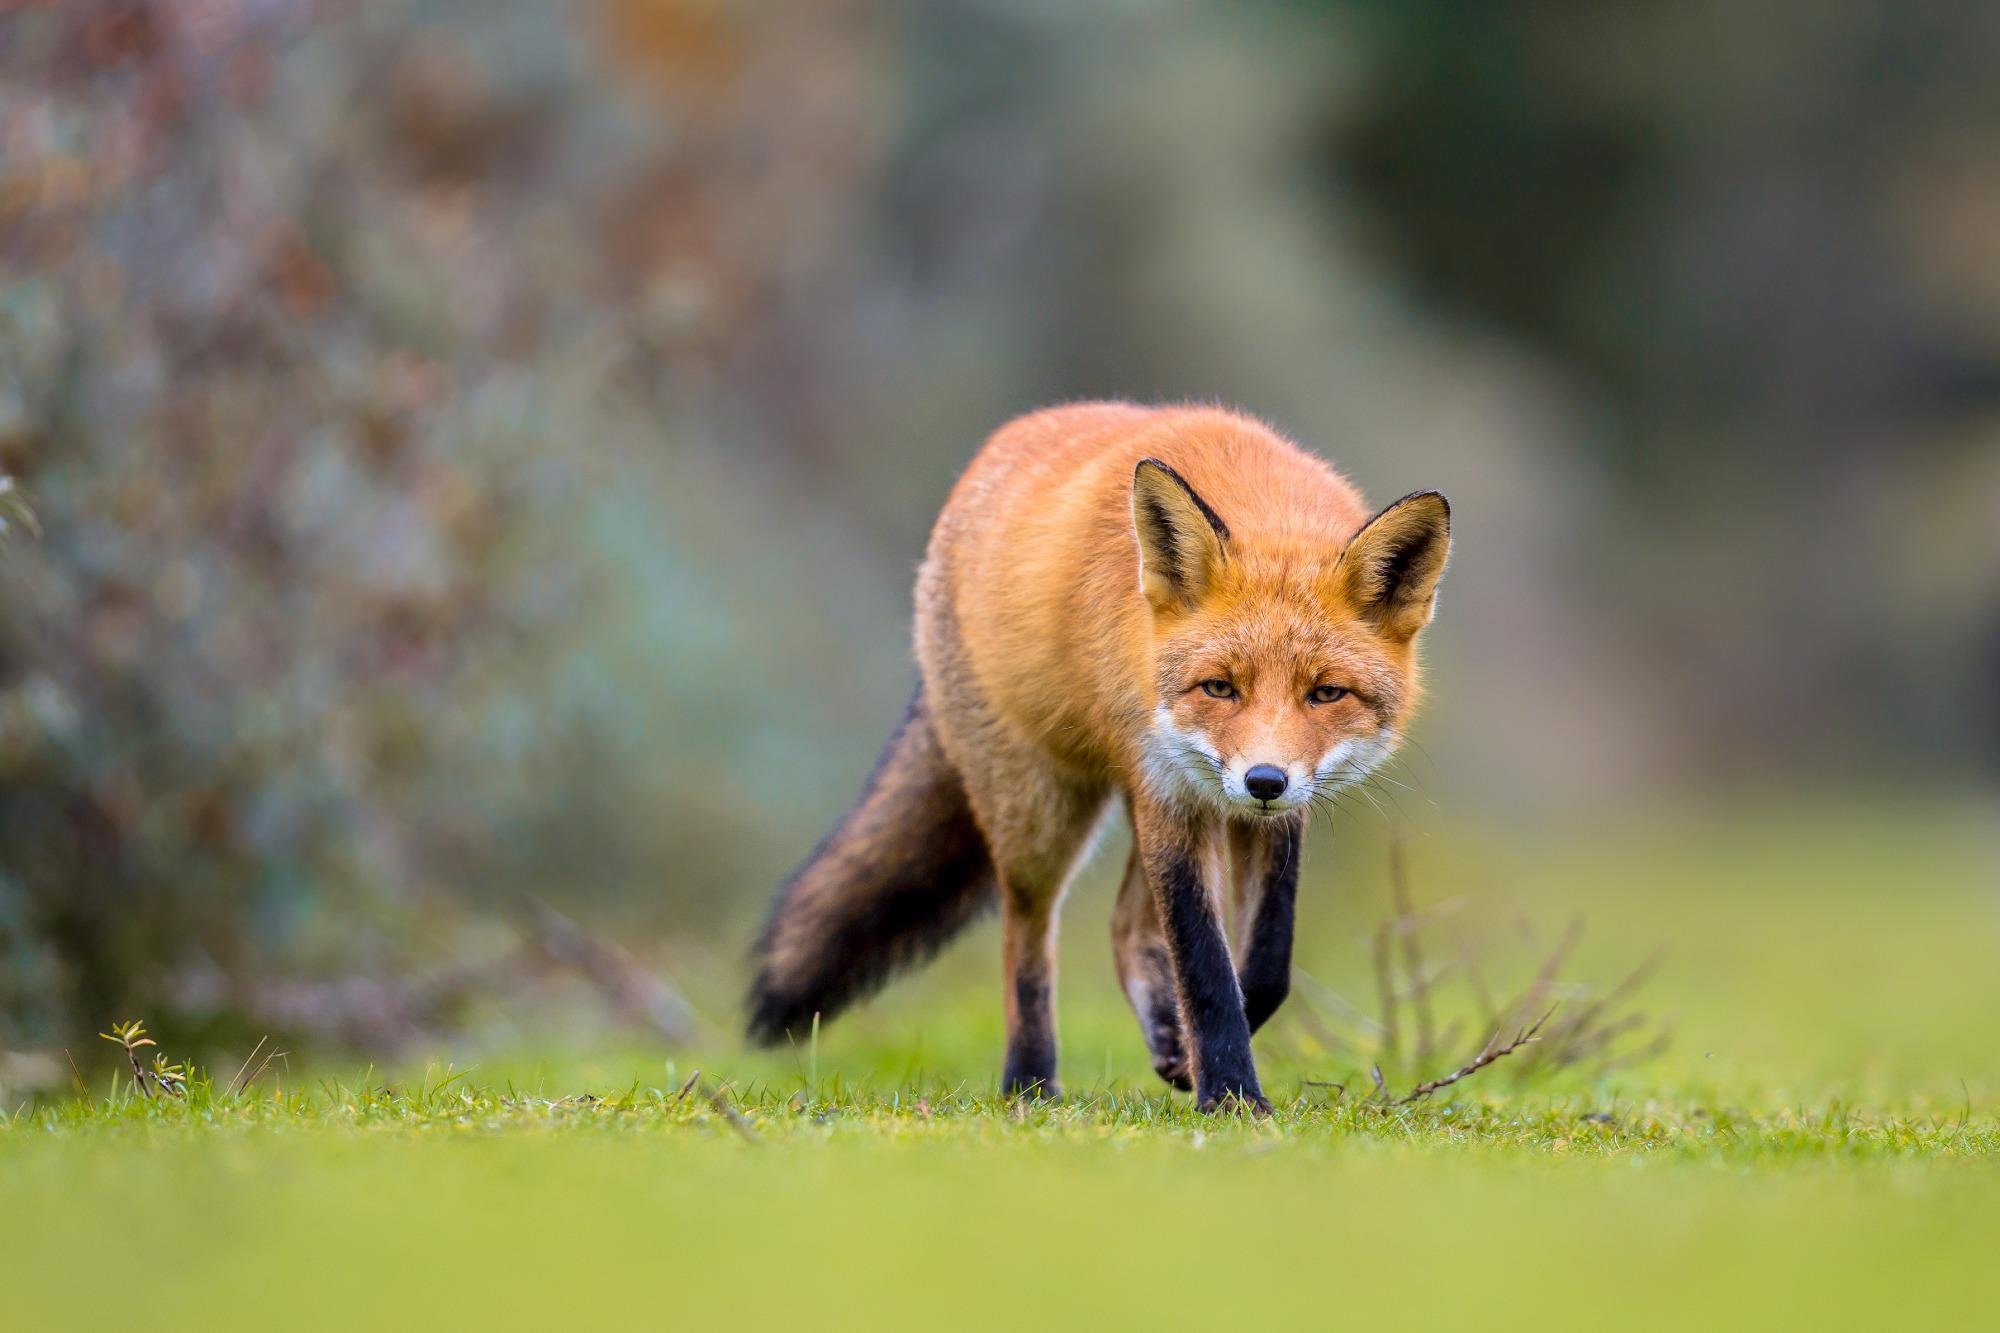 Red foxes susceptible to SARS-CoV-2 infection